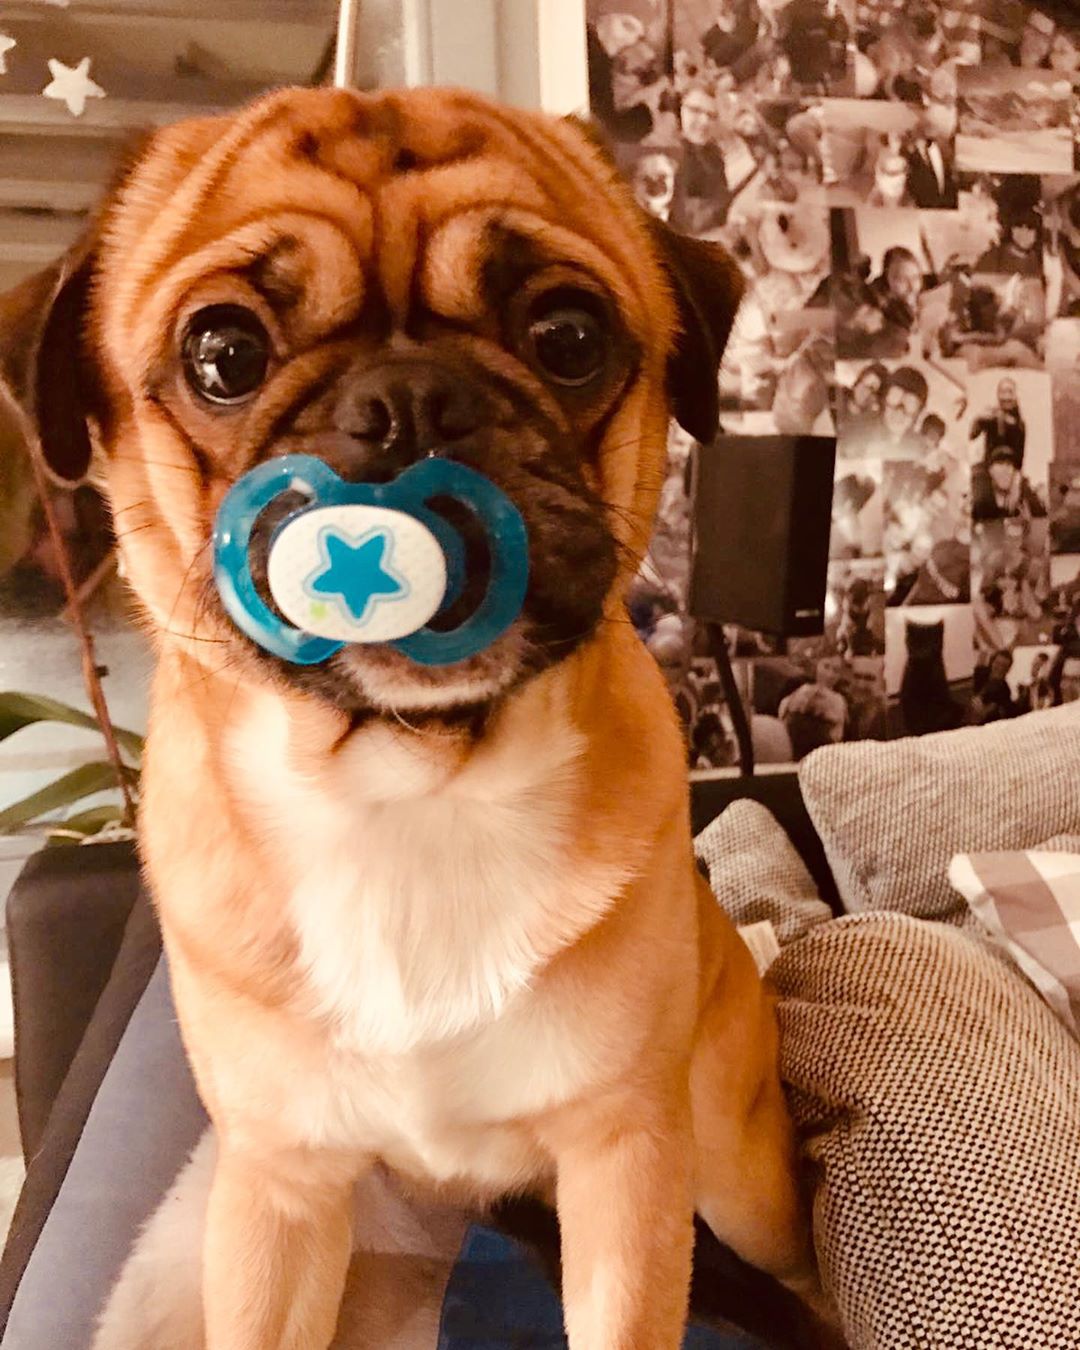 A Pug sitting on top of the couch with a pacifier in its mouth